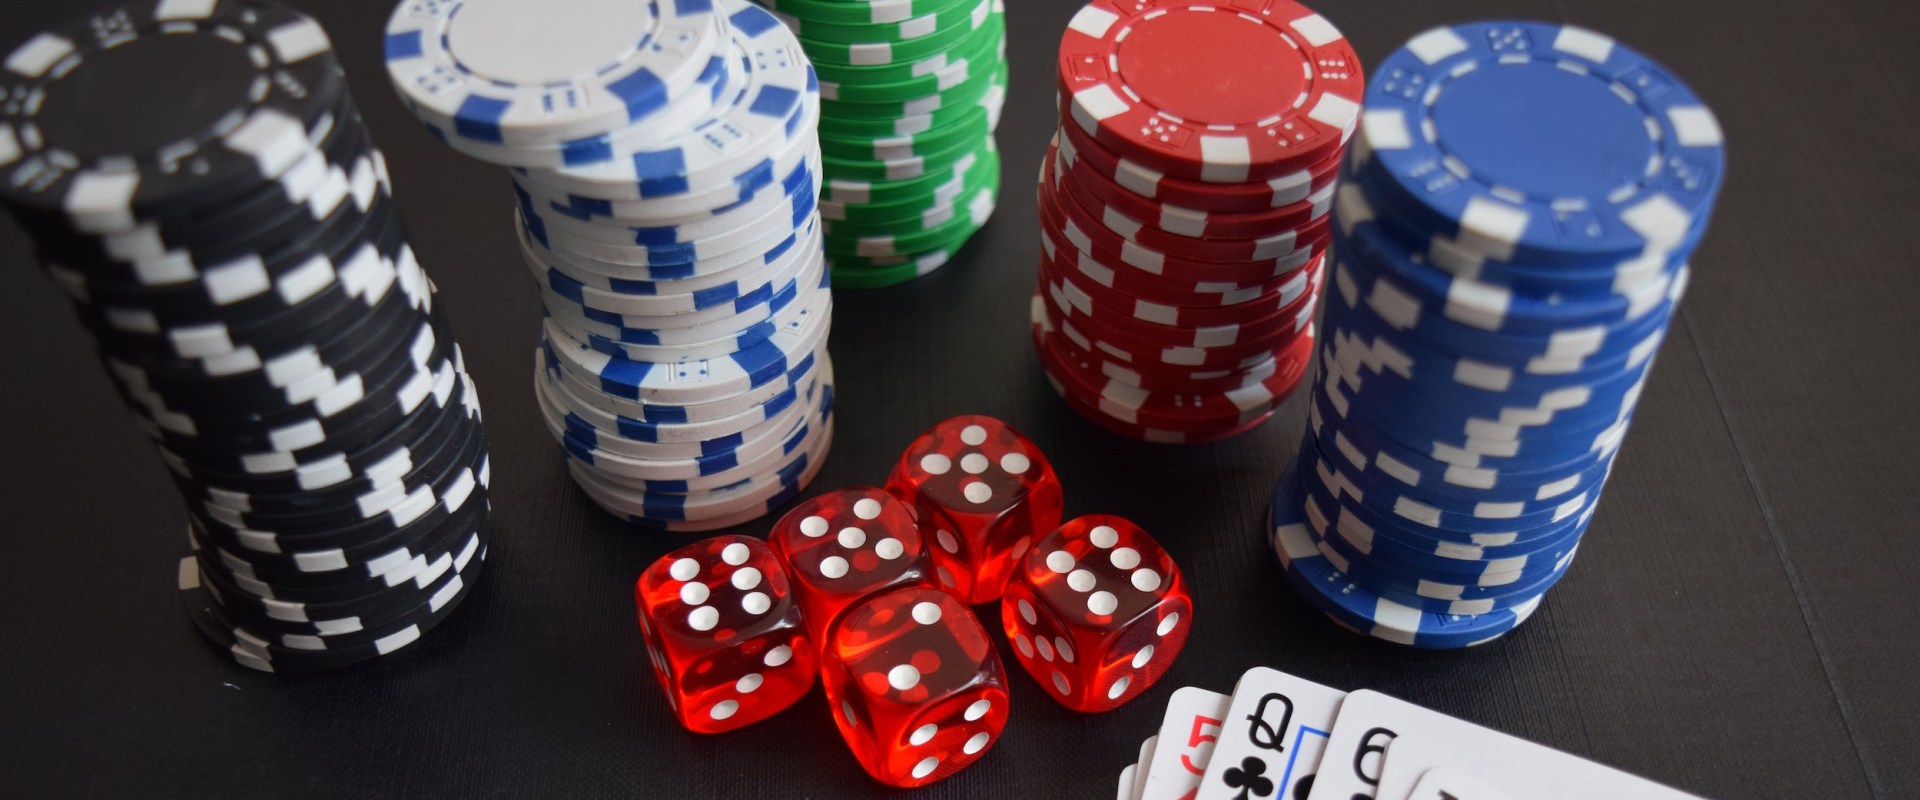 Taking Risks with Money to Get a Bigger Rush from Gambling